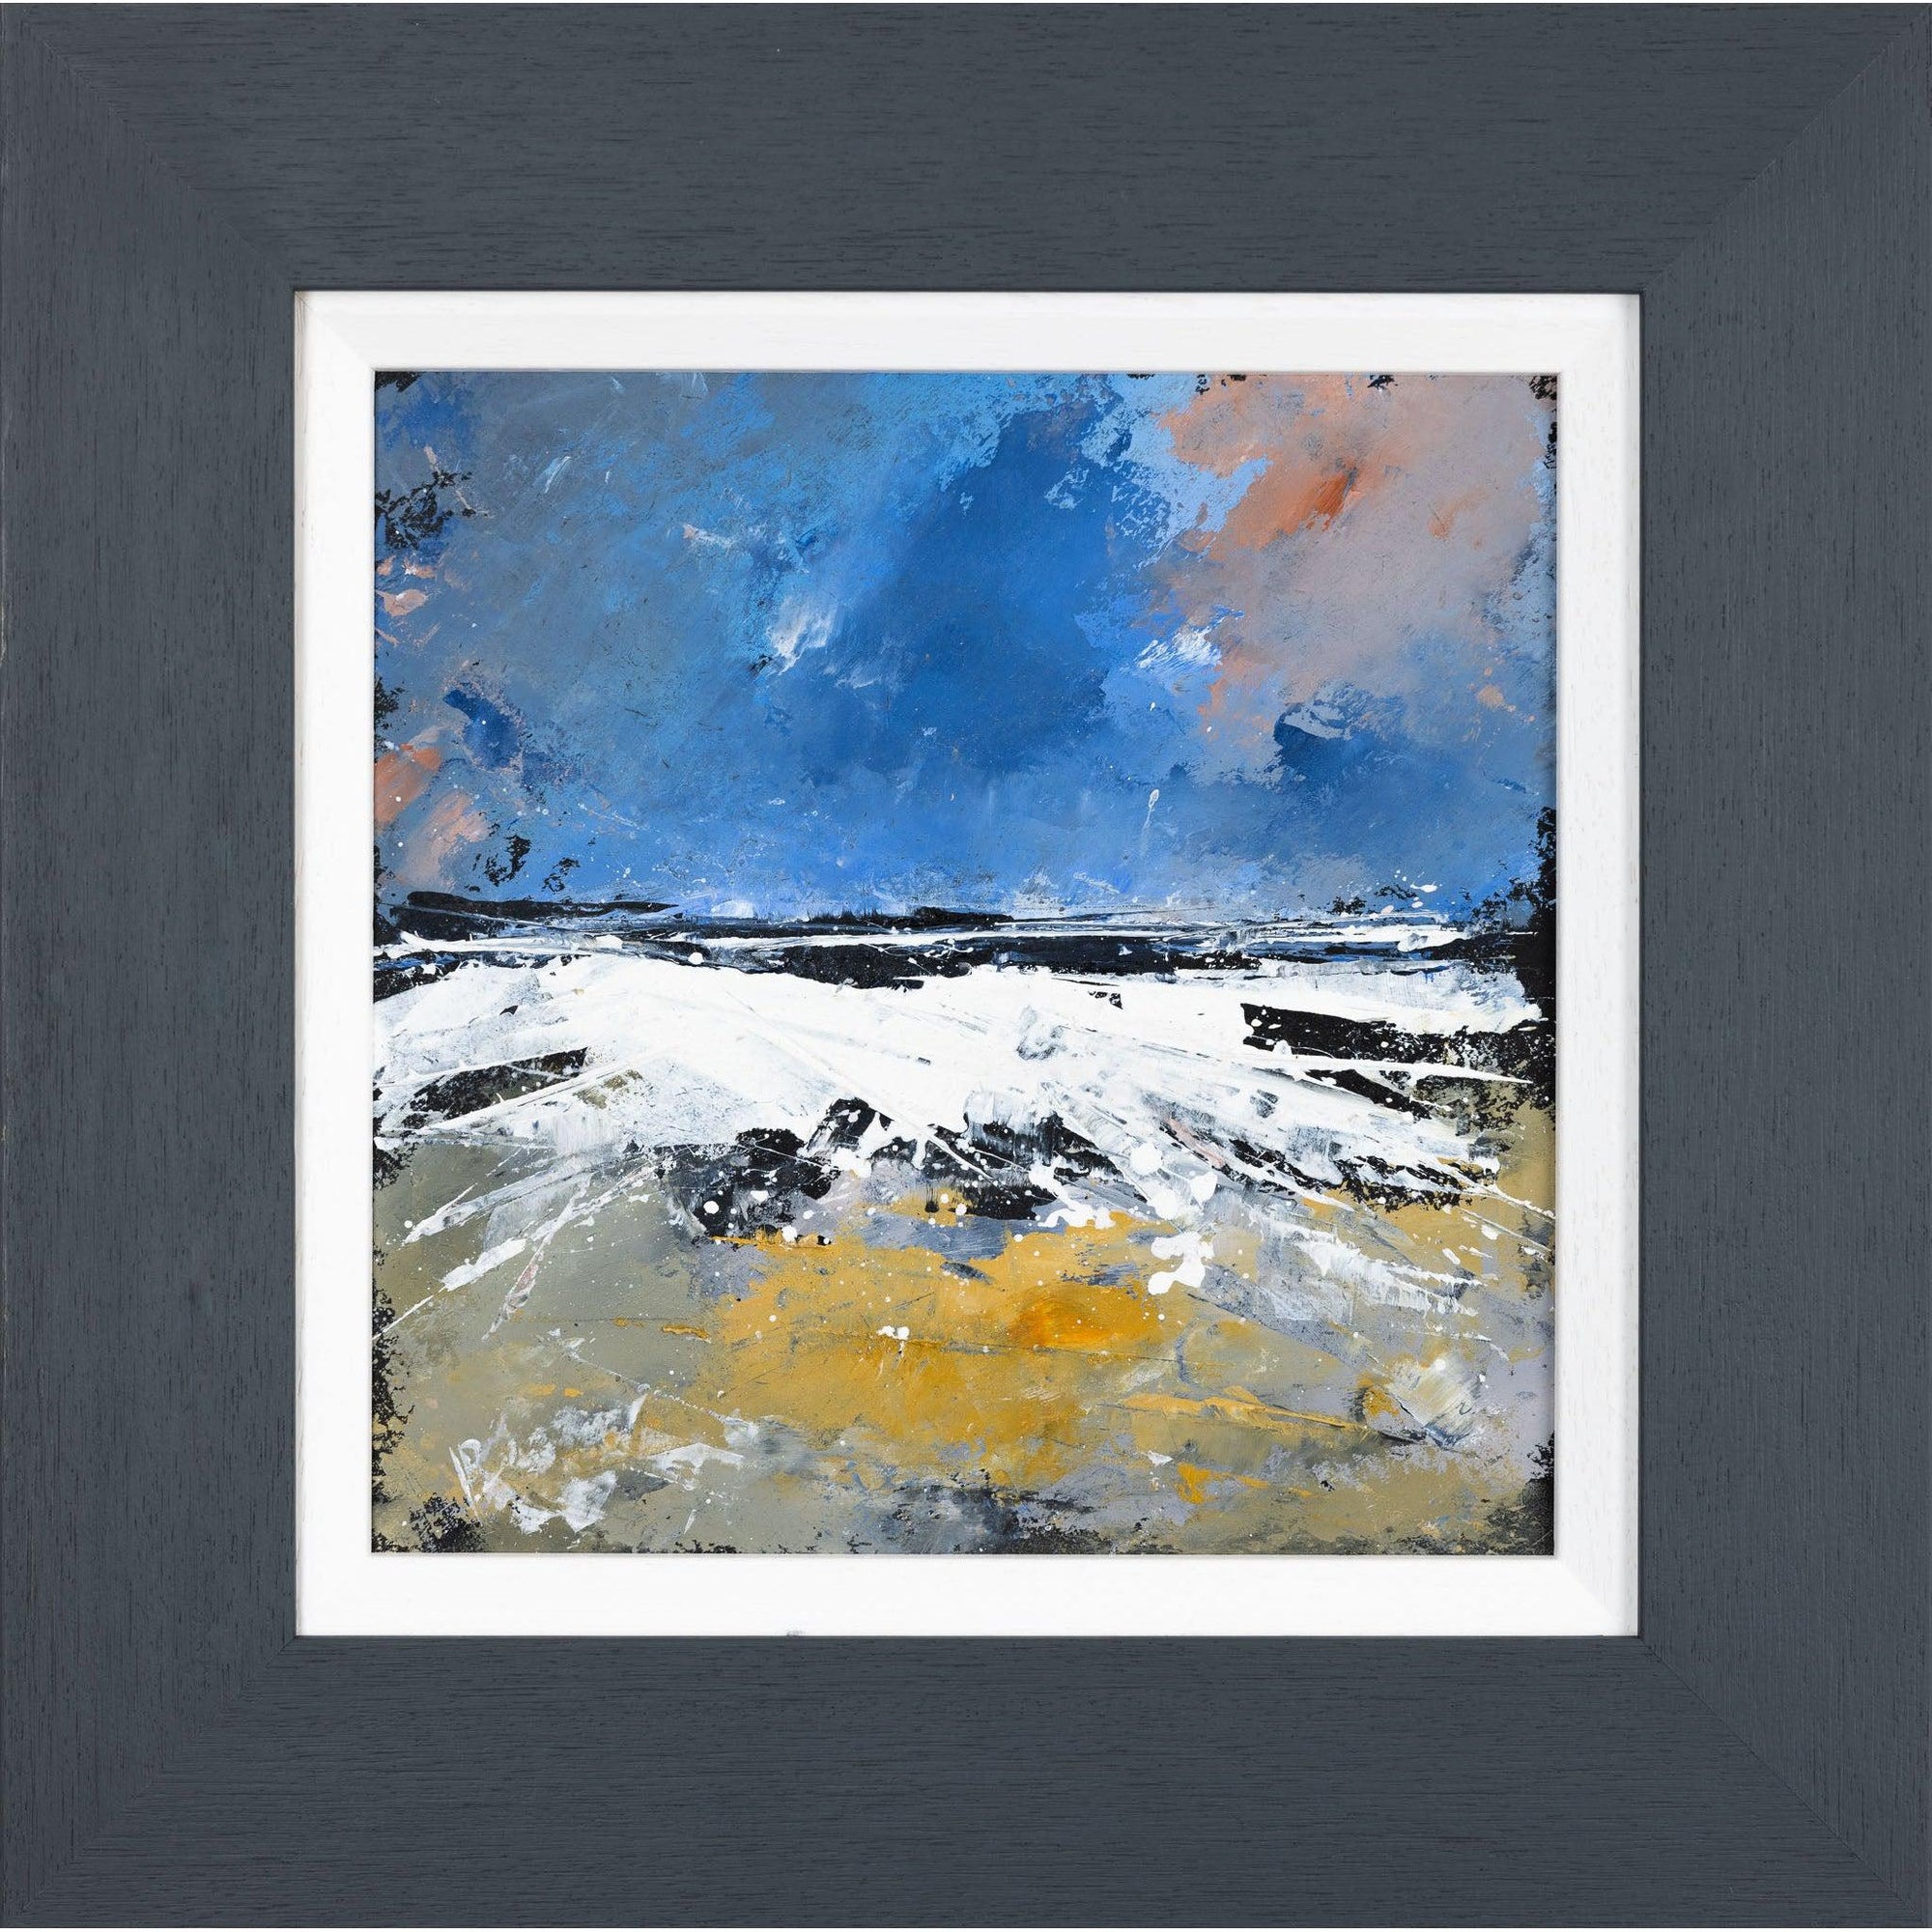 'Beach Explosion' oil on board original by Ian Rawnsley, available at Padstow Gallery, Cornwall